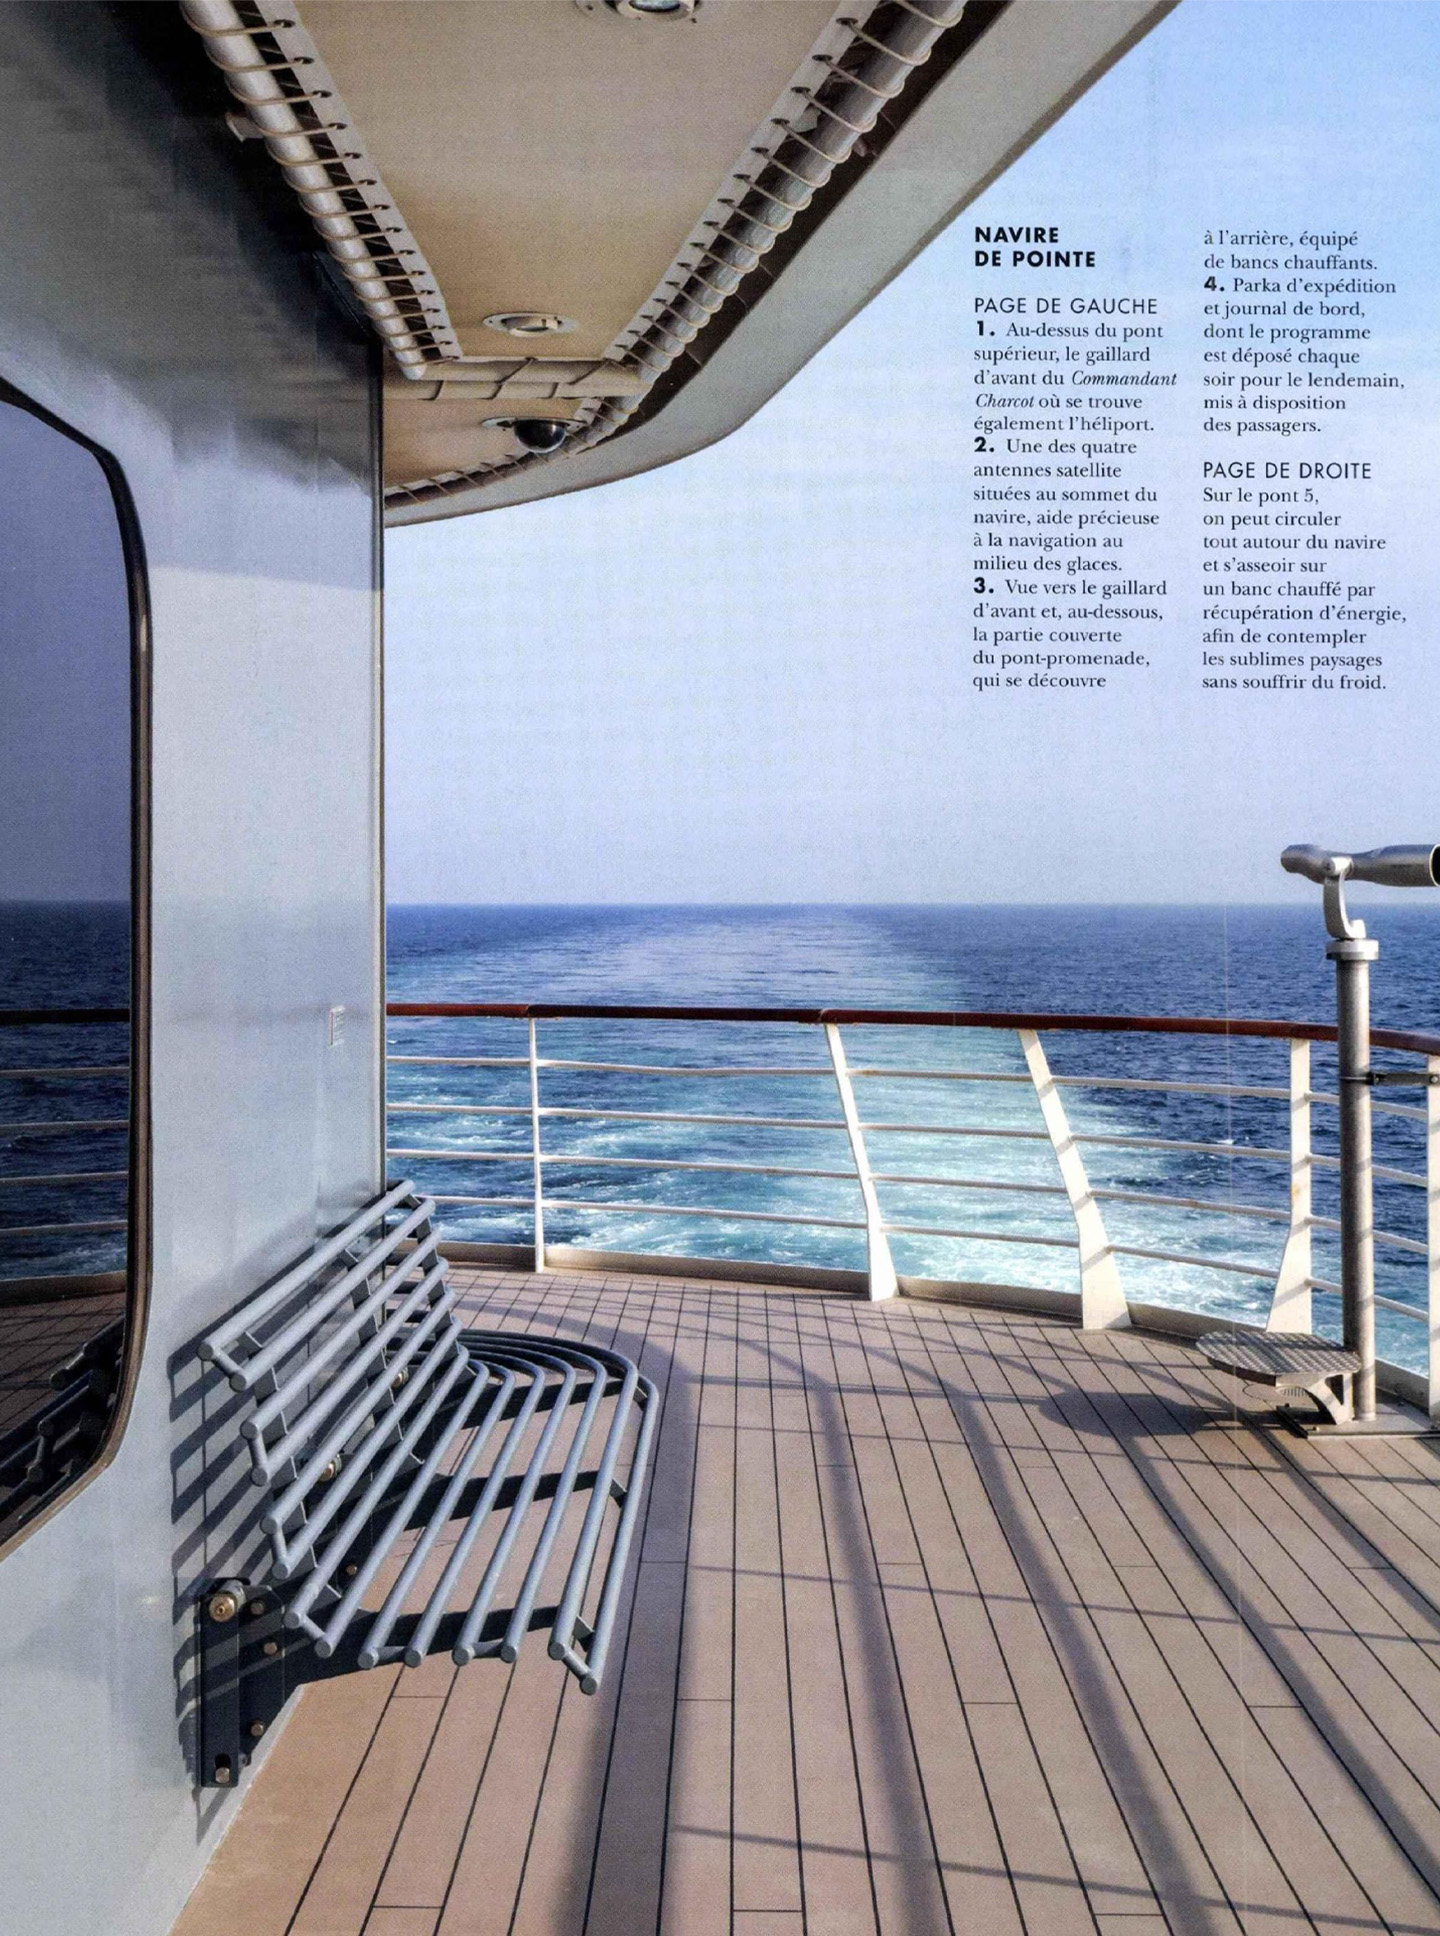 article on commander charcot of ponant in maisons côté ouest magazine, interior design by jean-philippe nuel, luxury polar expedition ship, cruise, luxury ship, interior design